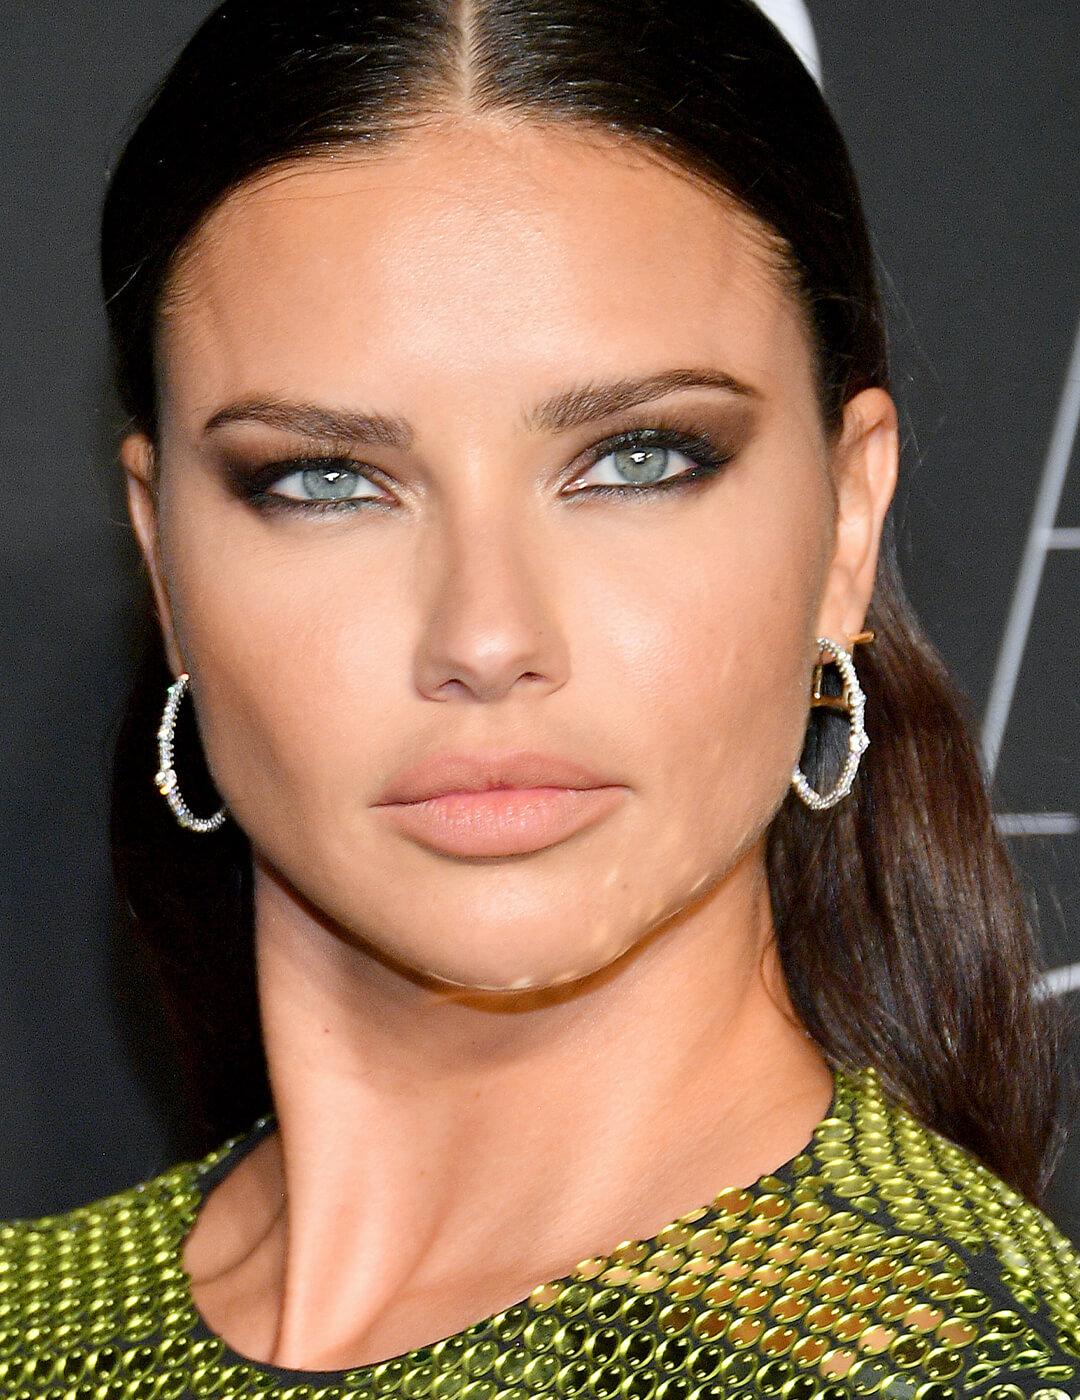 Adriana Lima looking fierce in a bronzy, metallic smoky eye makeup look and green sequined dress